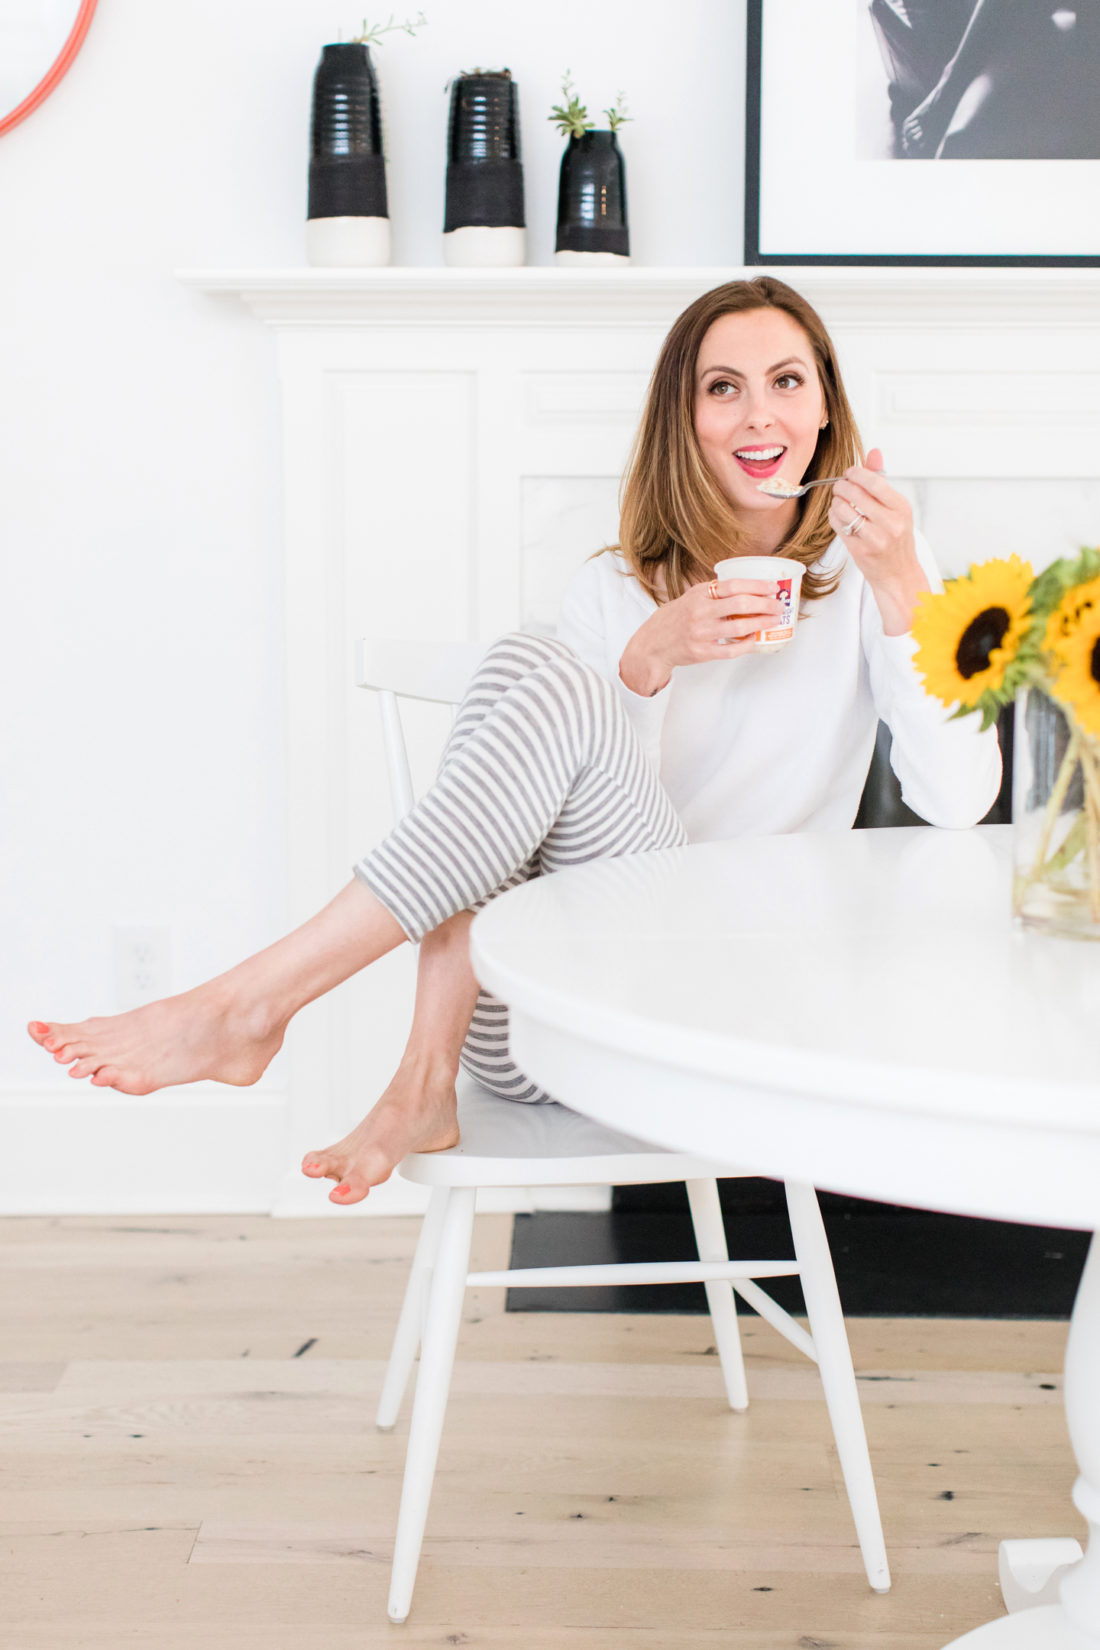 Eva Amurri Martino sits at the kitchen table in a pair of grey and white striped pajamas and eat breakfast next to a vase of sunflowers